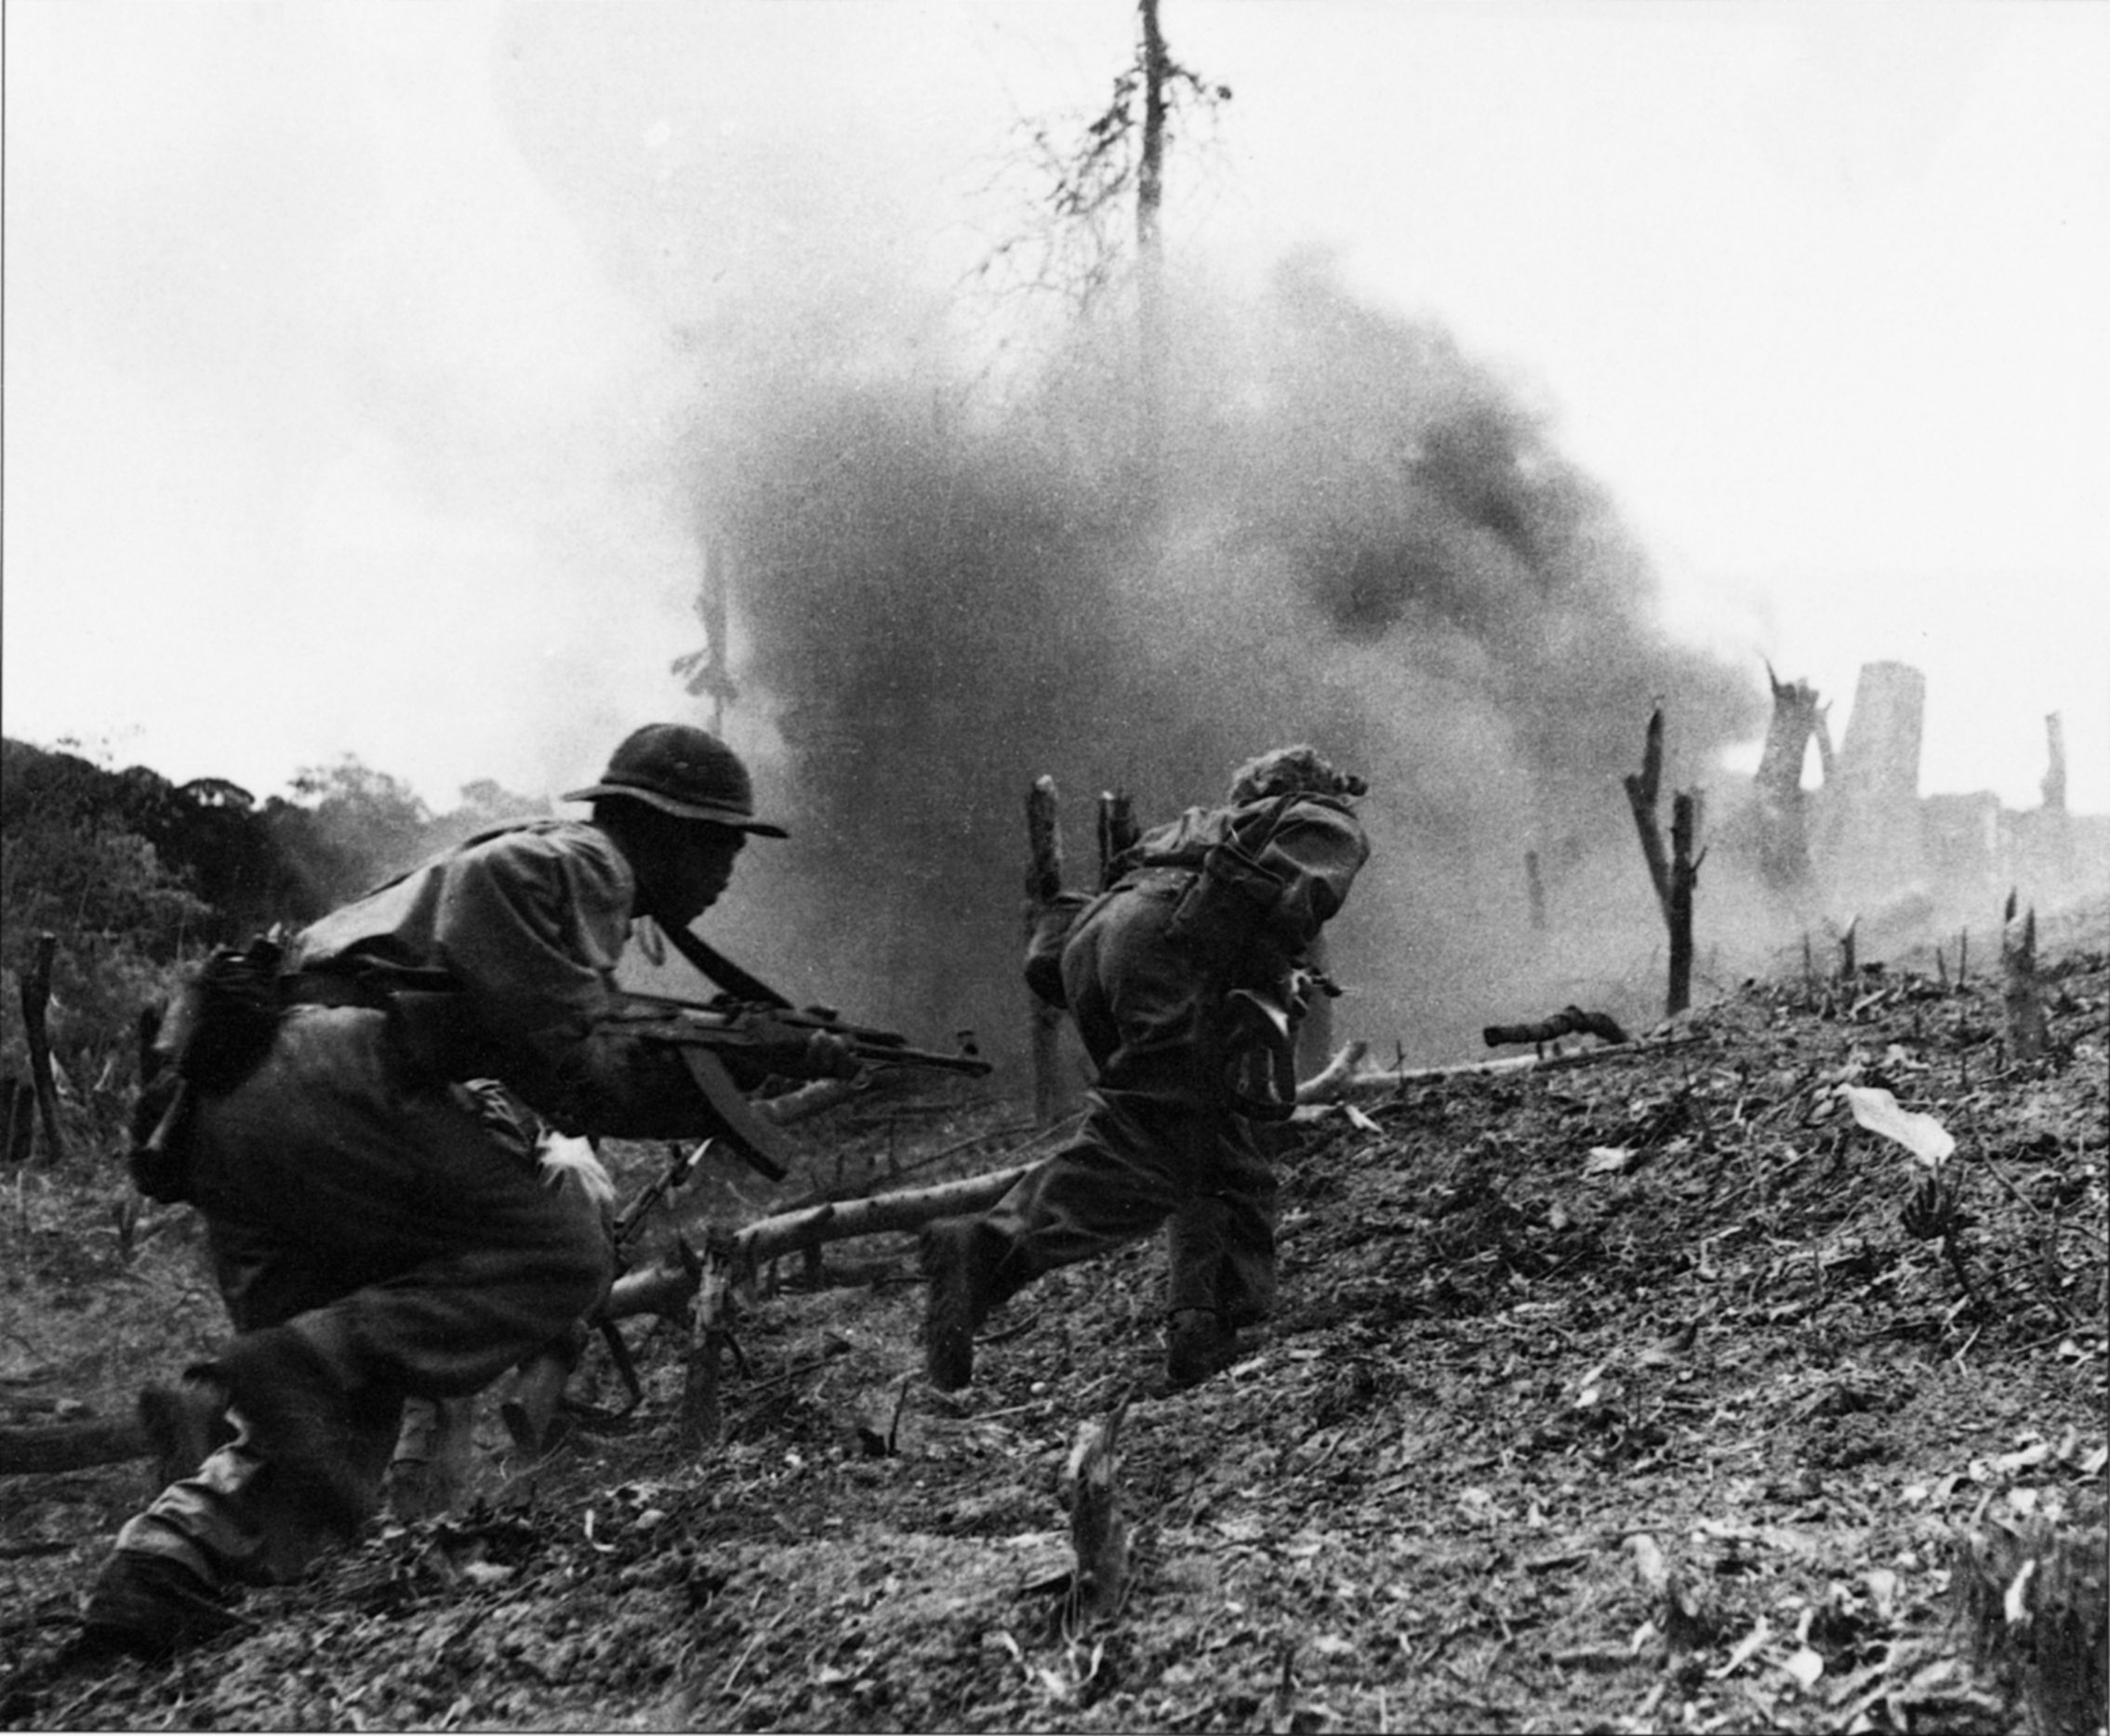 A bogus NVA photo purports to show an assault on the Marines at Khe Sanh. The terrain is too gentle, and such attacks usually came at night to avoid American artillery fire.